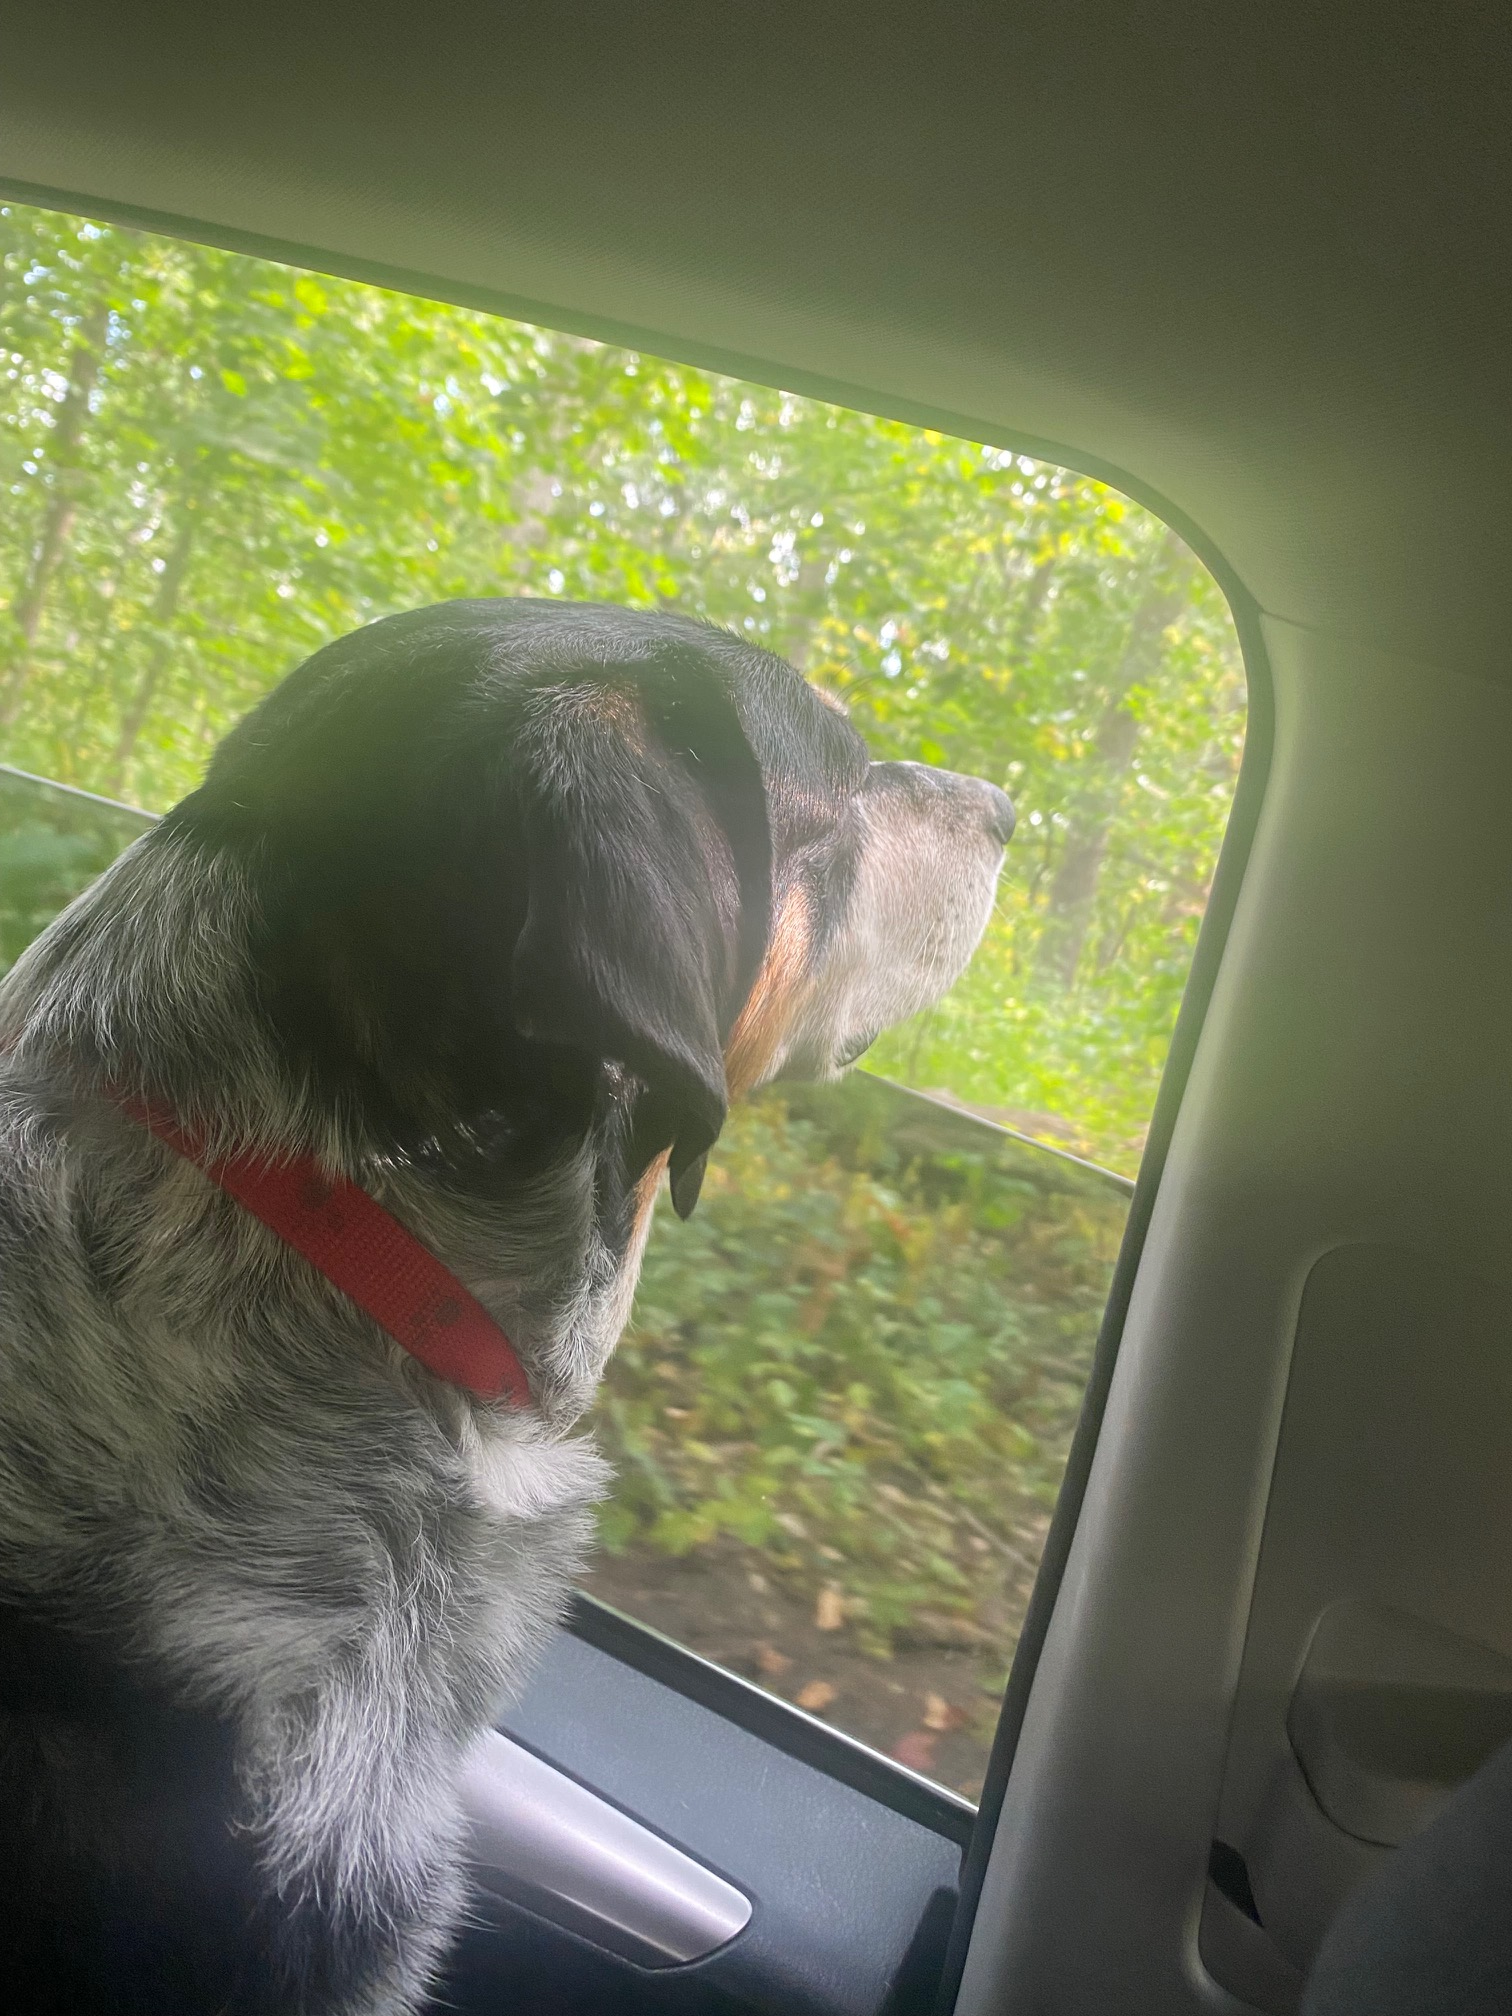 Black and White dog looks out an open backseat car window. There are trees in the background.